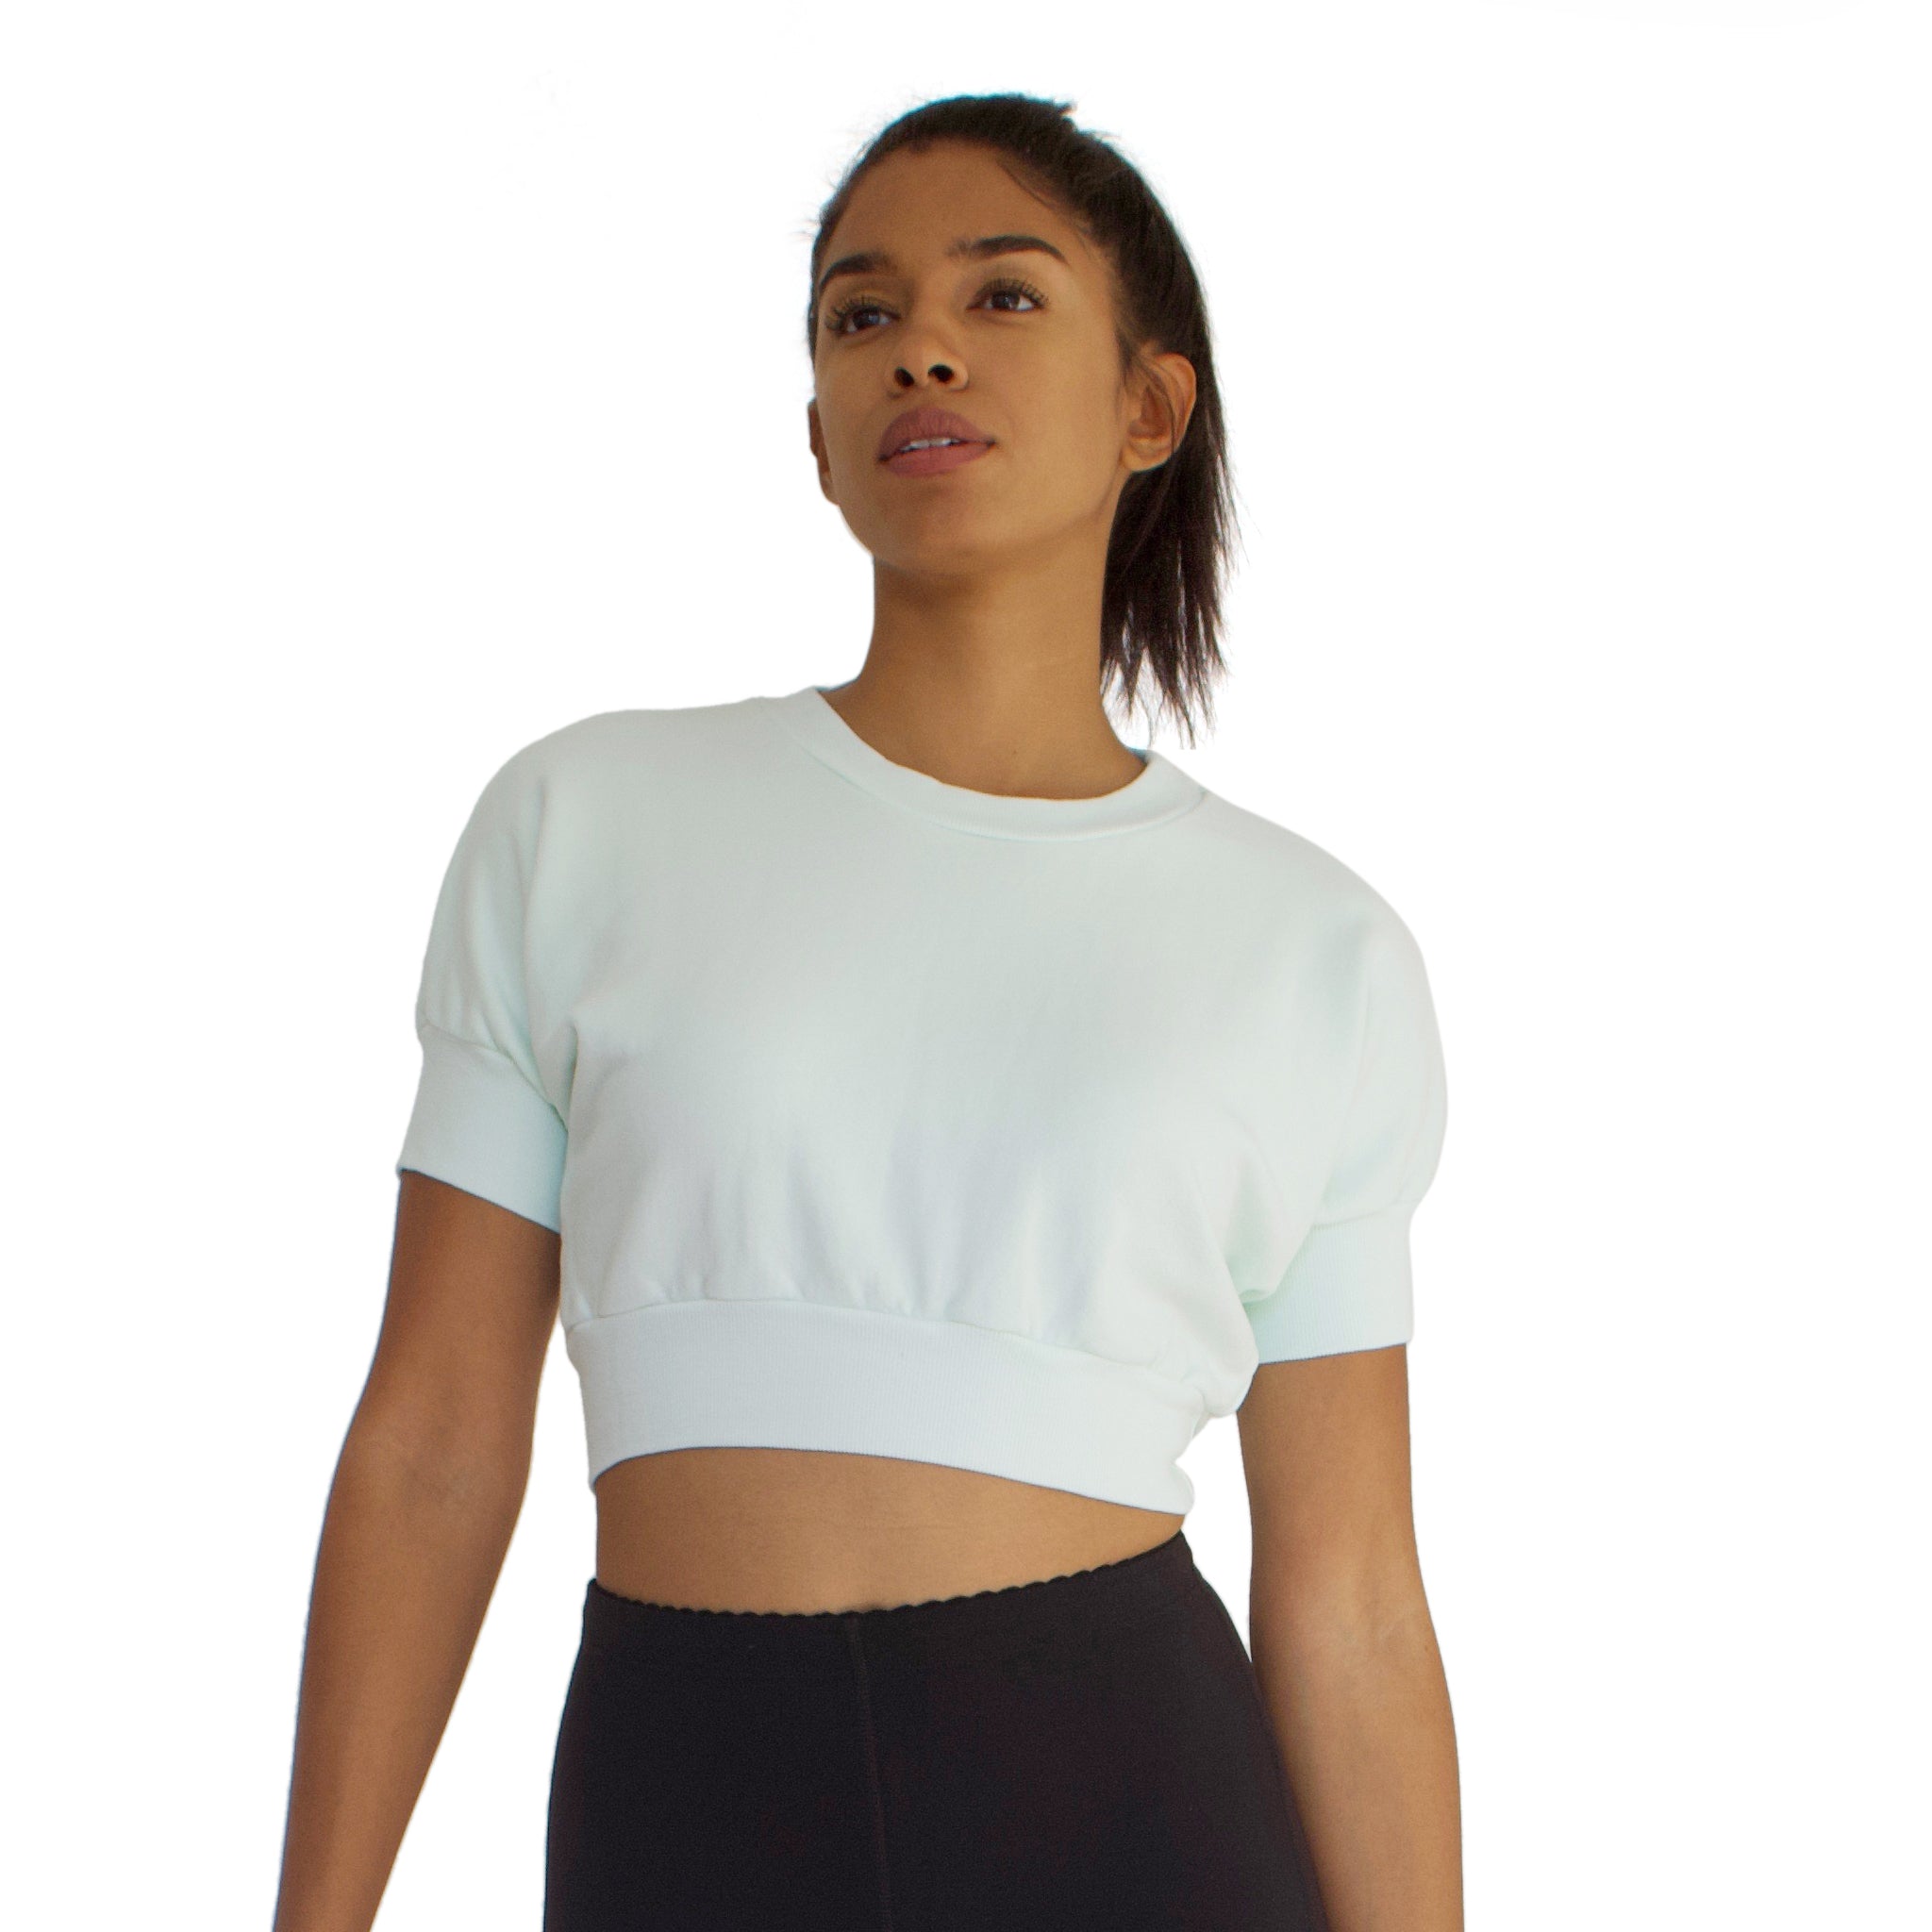 The Anita is a 100% cotton French Terry crop top in Mint. Short dolman sleeves with a crew neck.